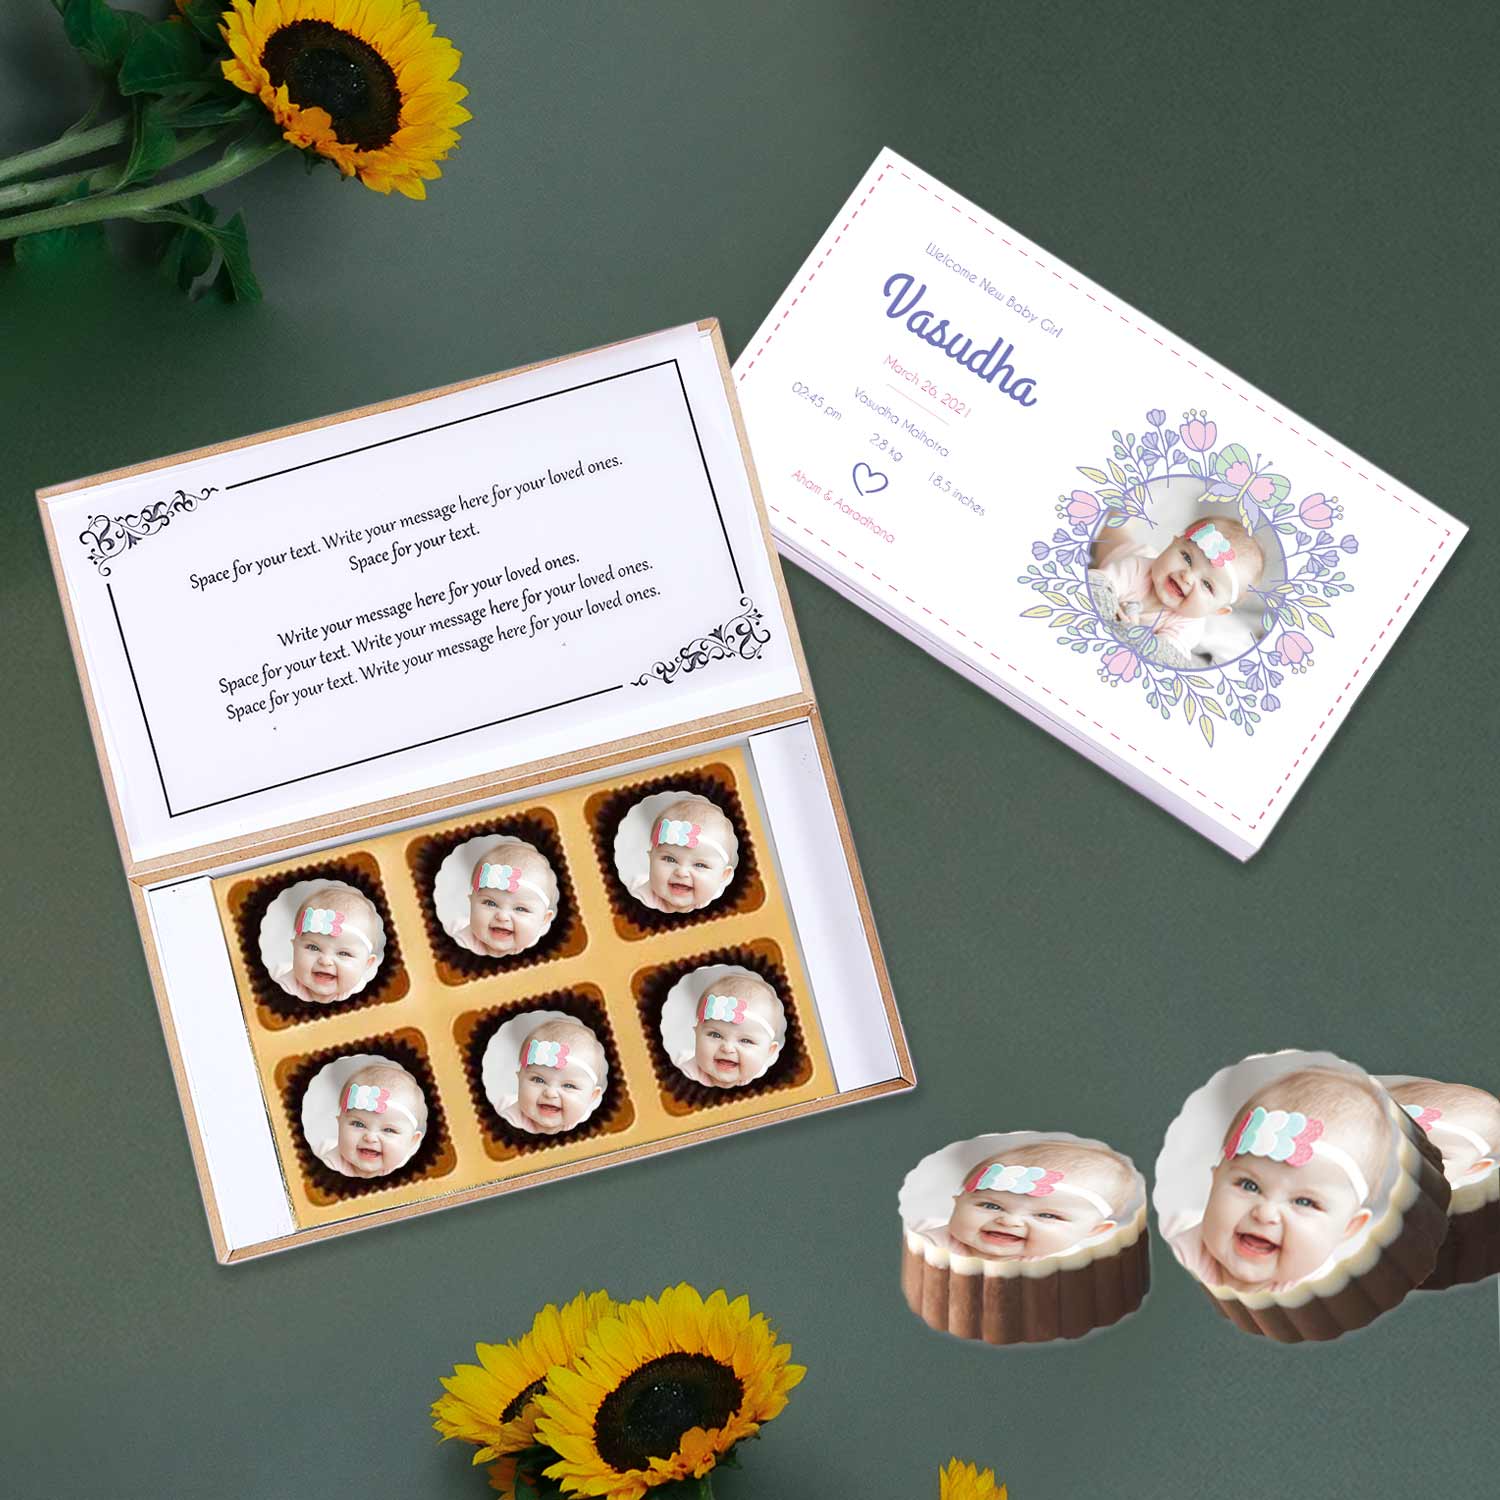 Floral framed photo printed chocolates baby announcement